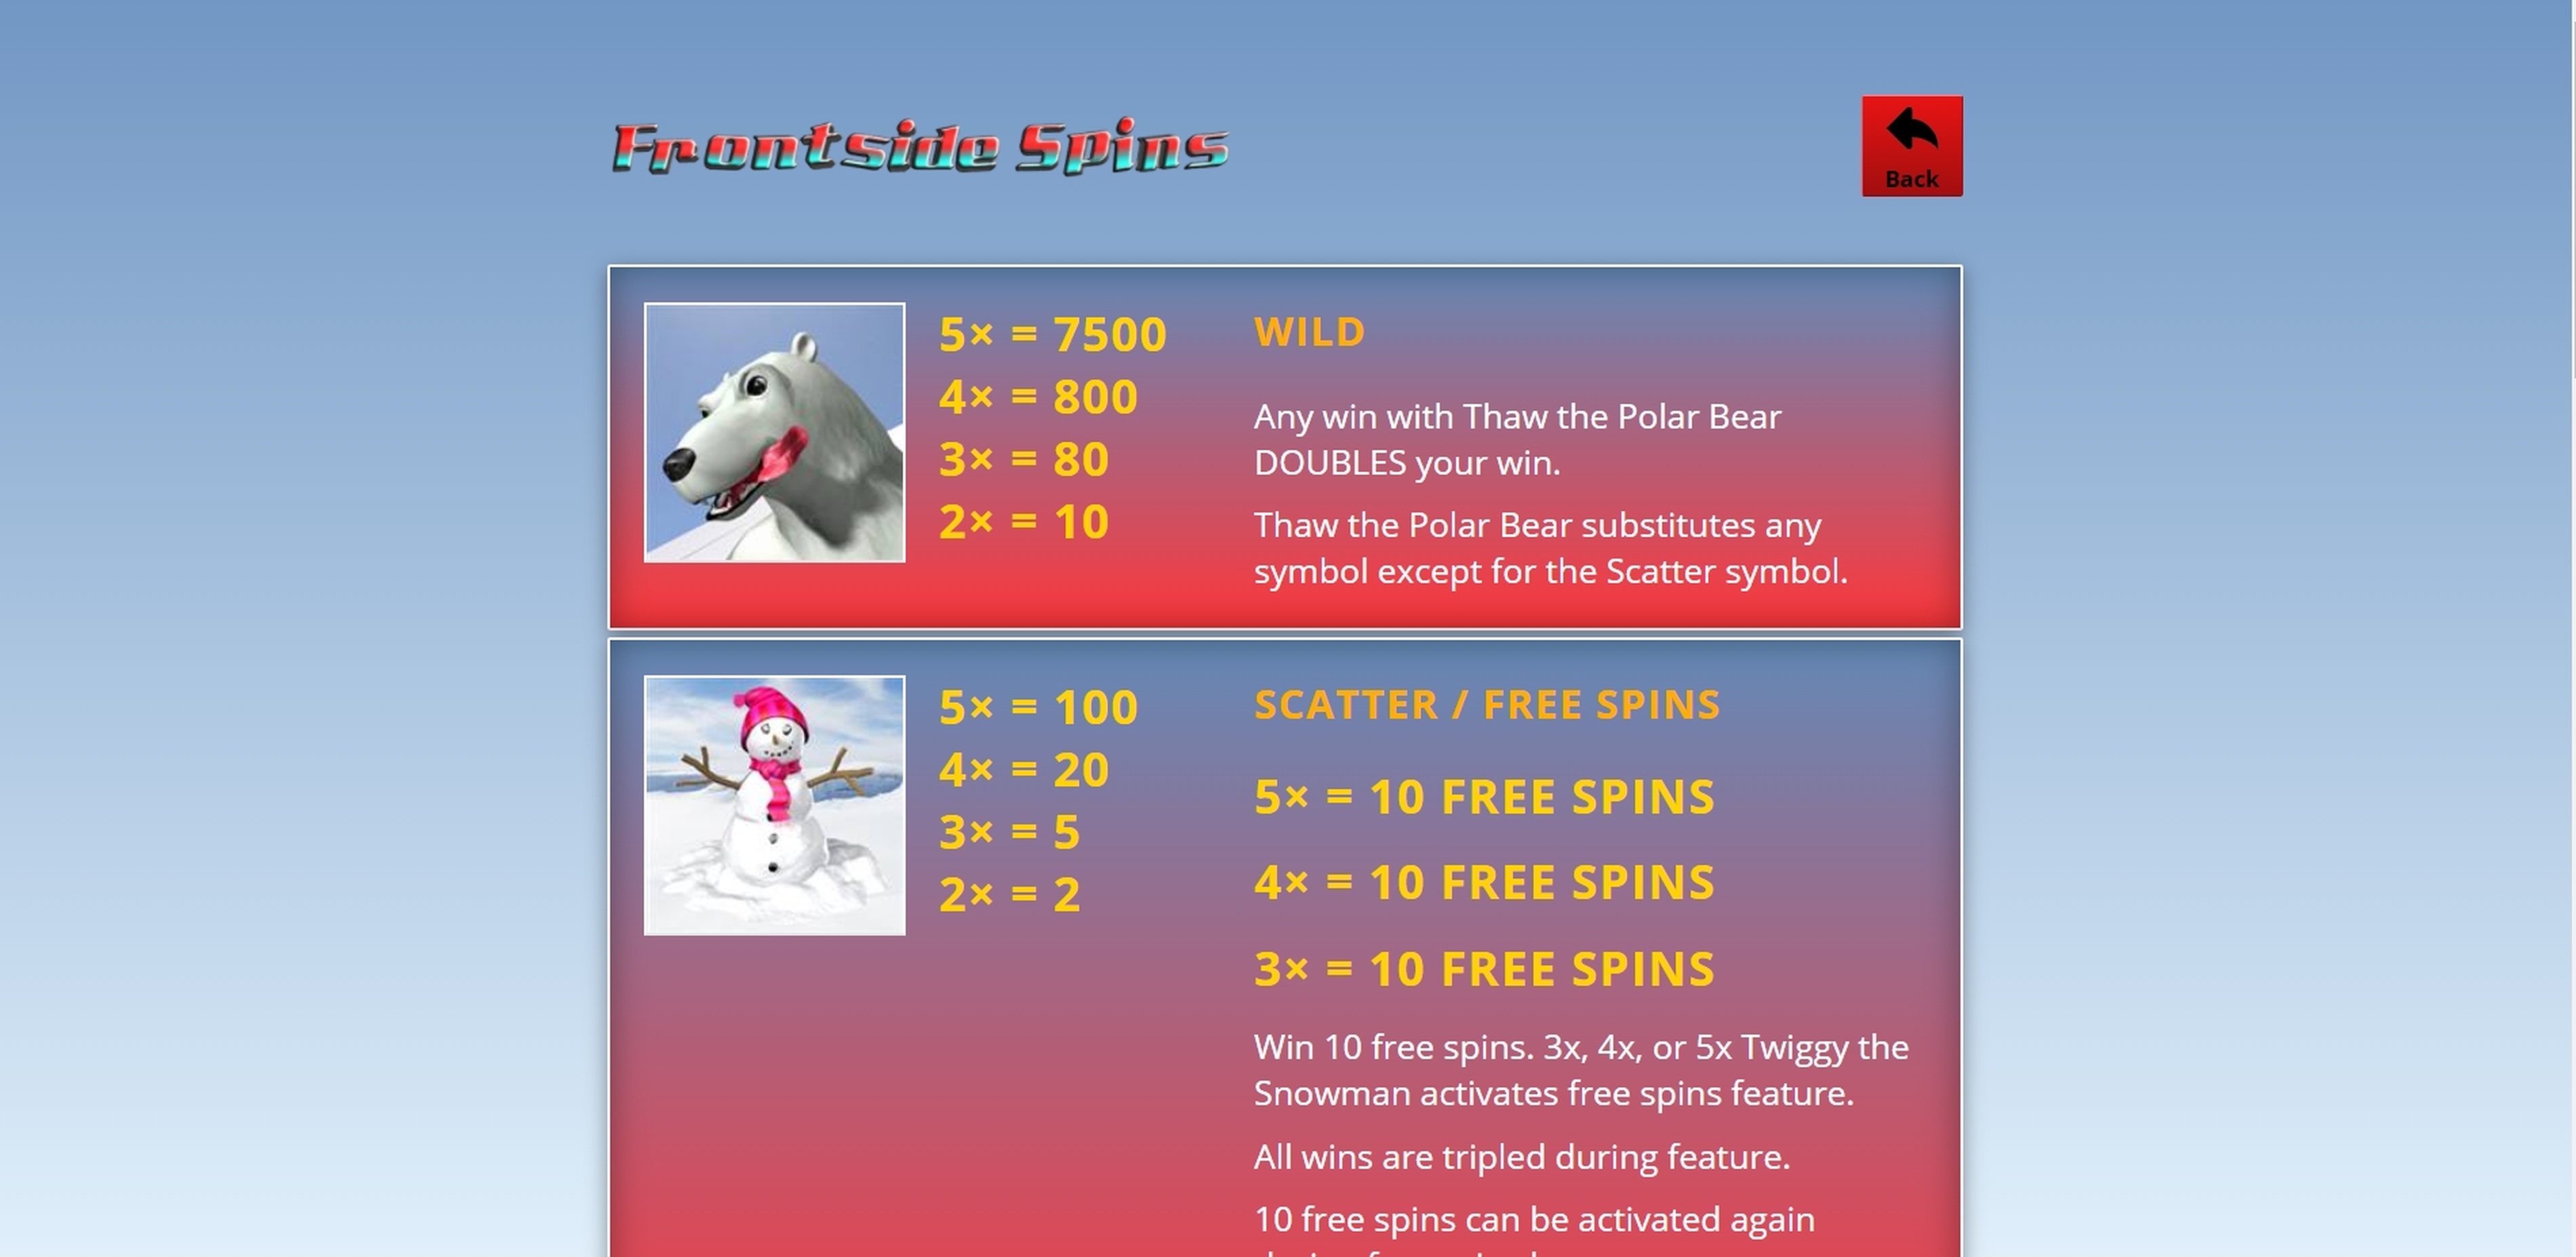 Info of Frontside Spins Slot Game by Genii